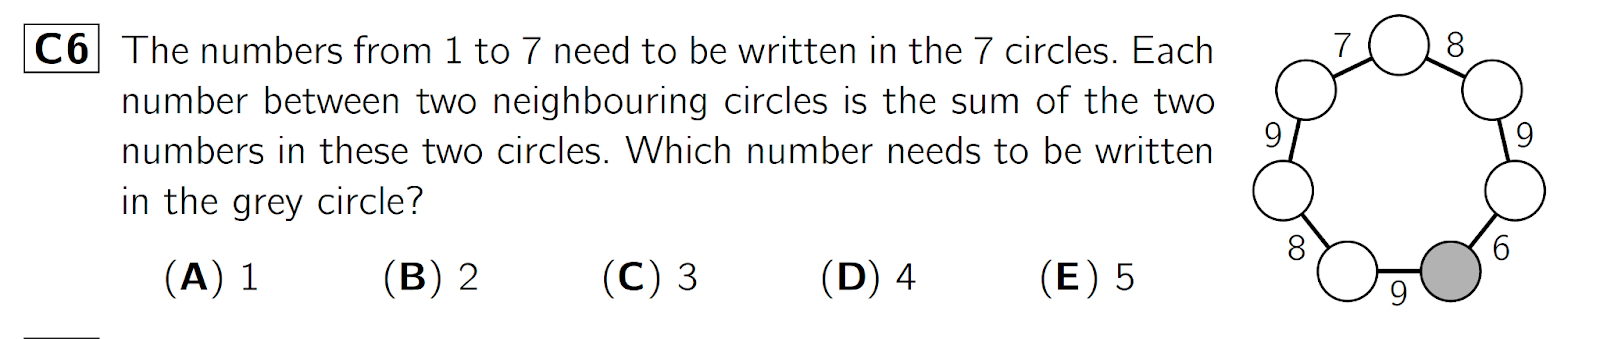 Example question from 3rd-4th Grade English contest